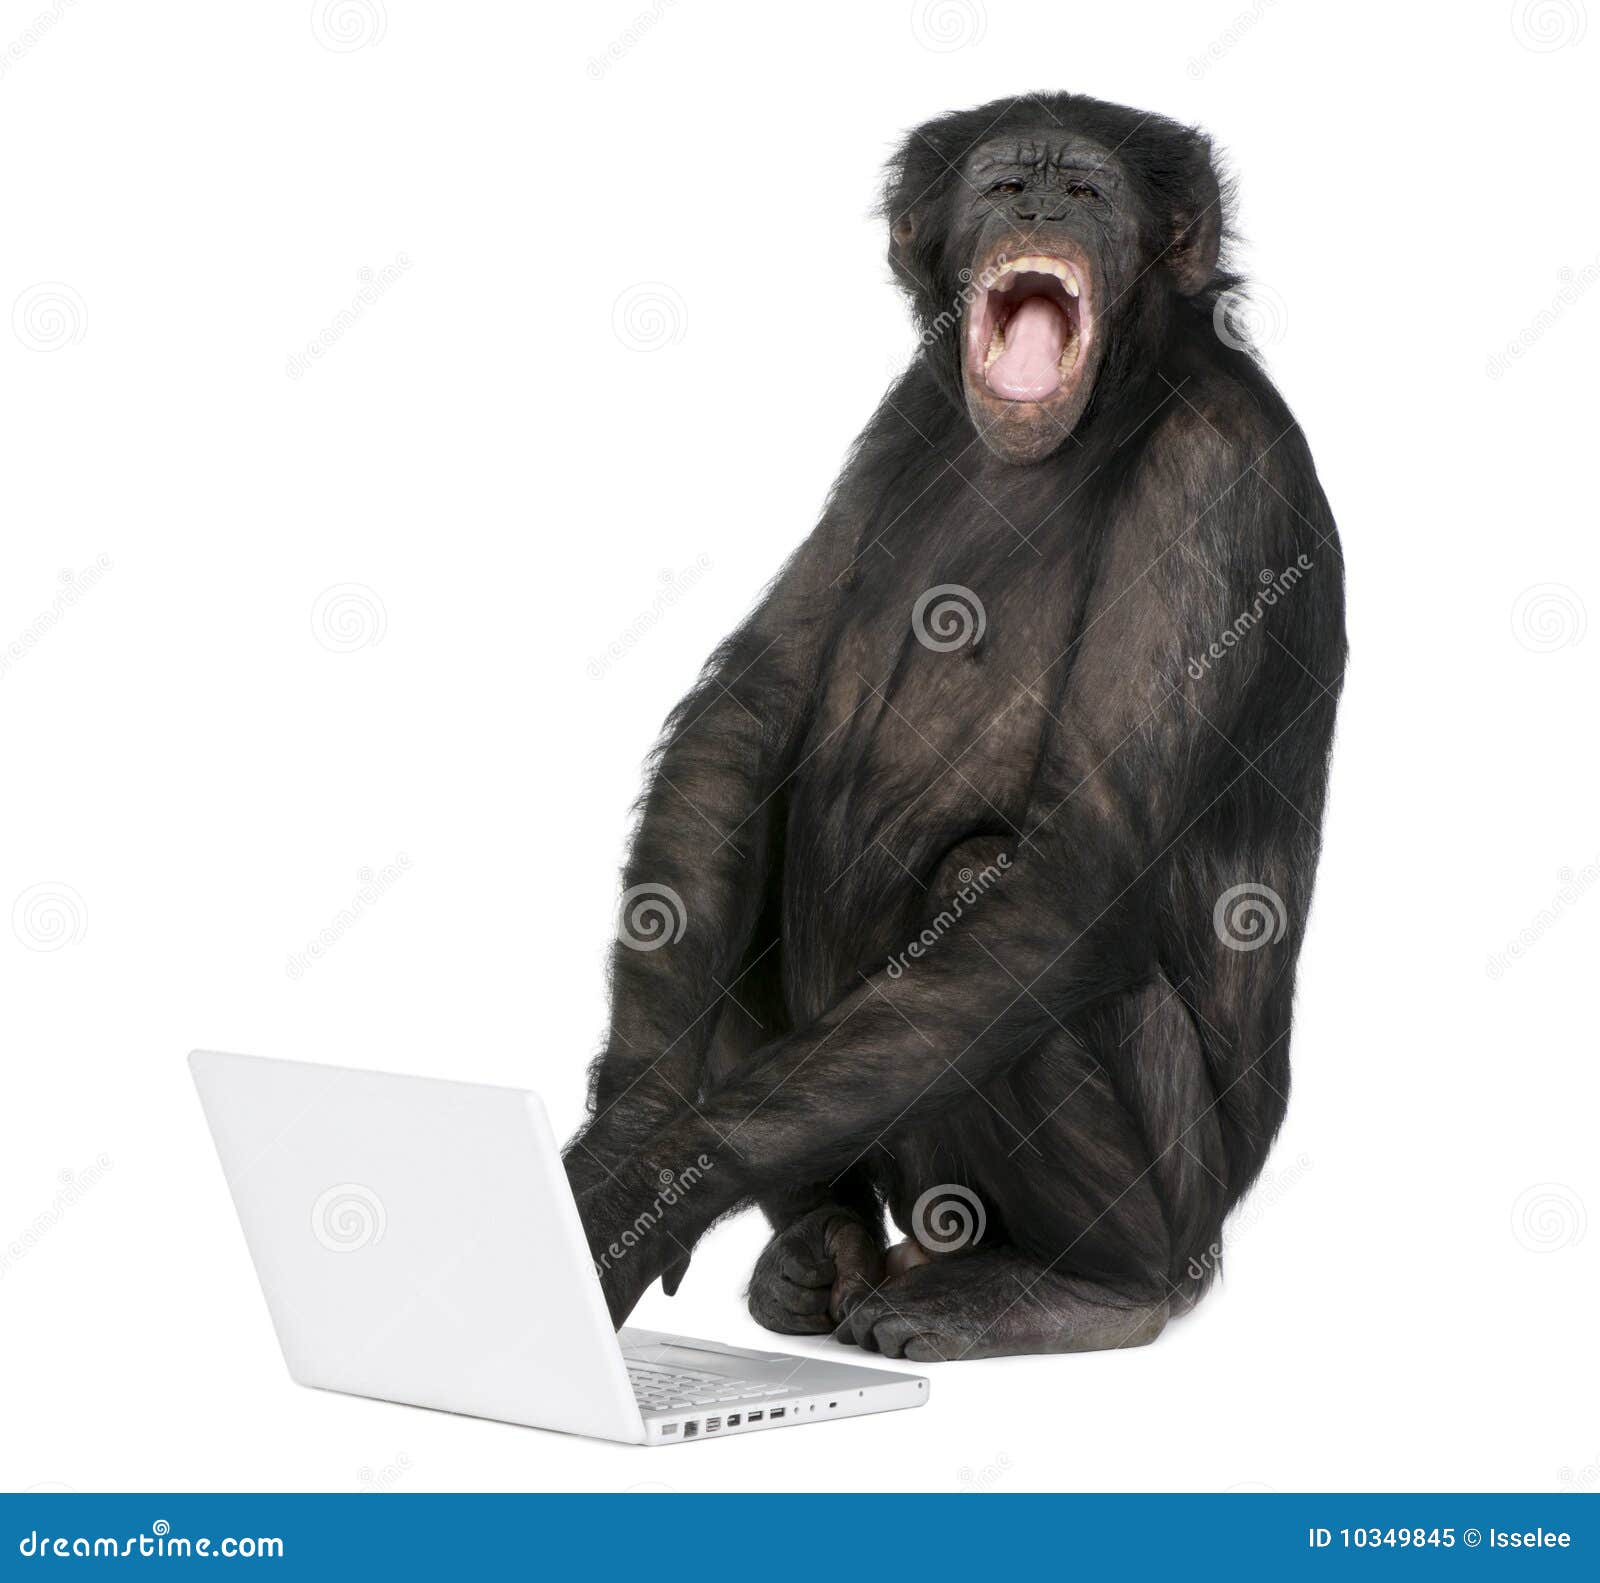 Monkey Playing with a Laptop Stock Image - Image of learning, discovery